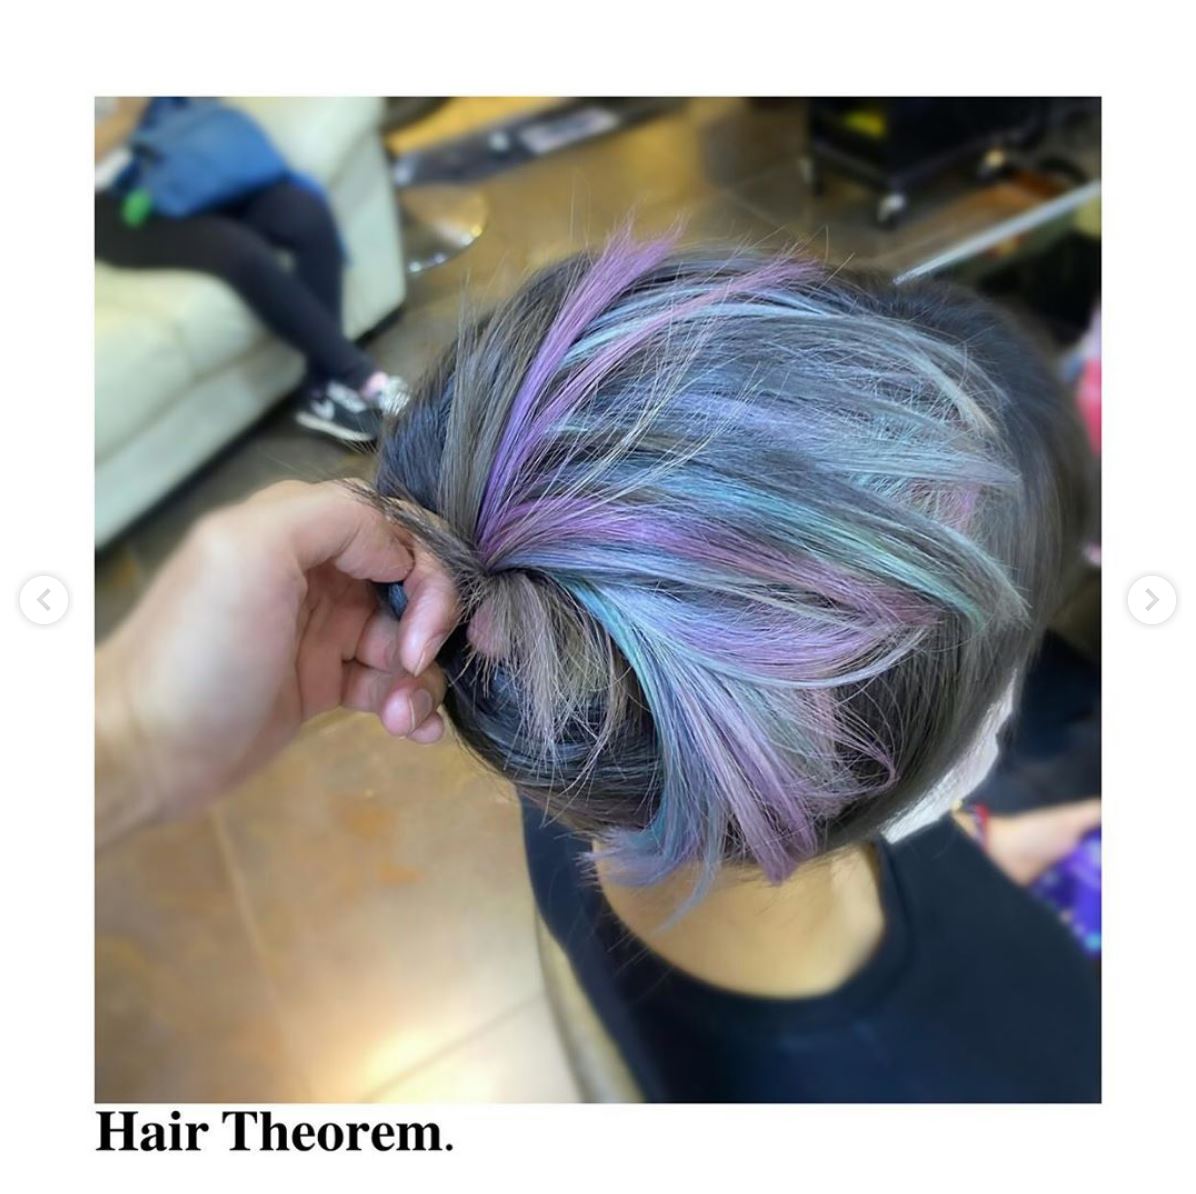 Hair Theorem (Lam Tin)】Latest Information - Book Online - 32 Photos - 3  Reviews｜ | Toby